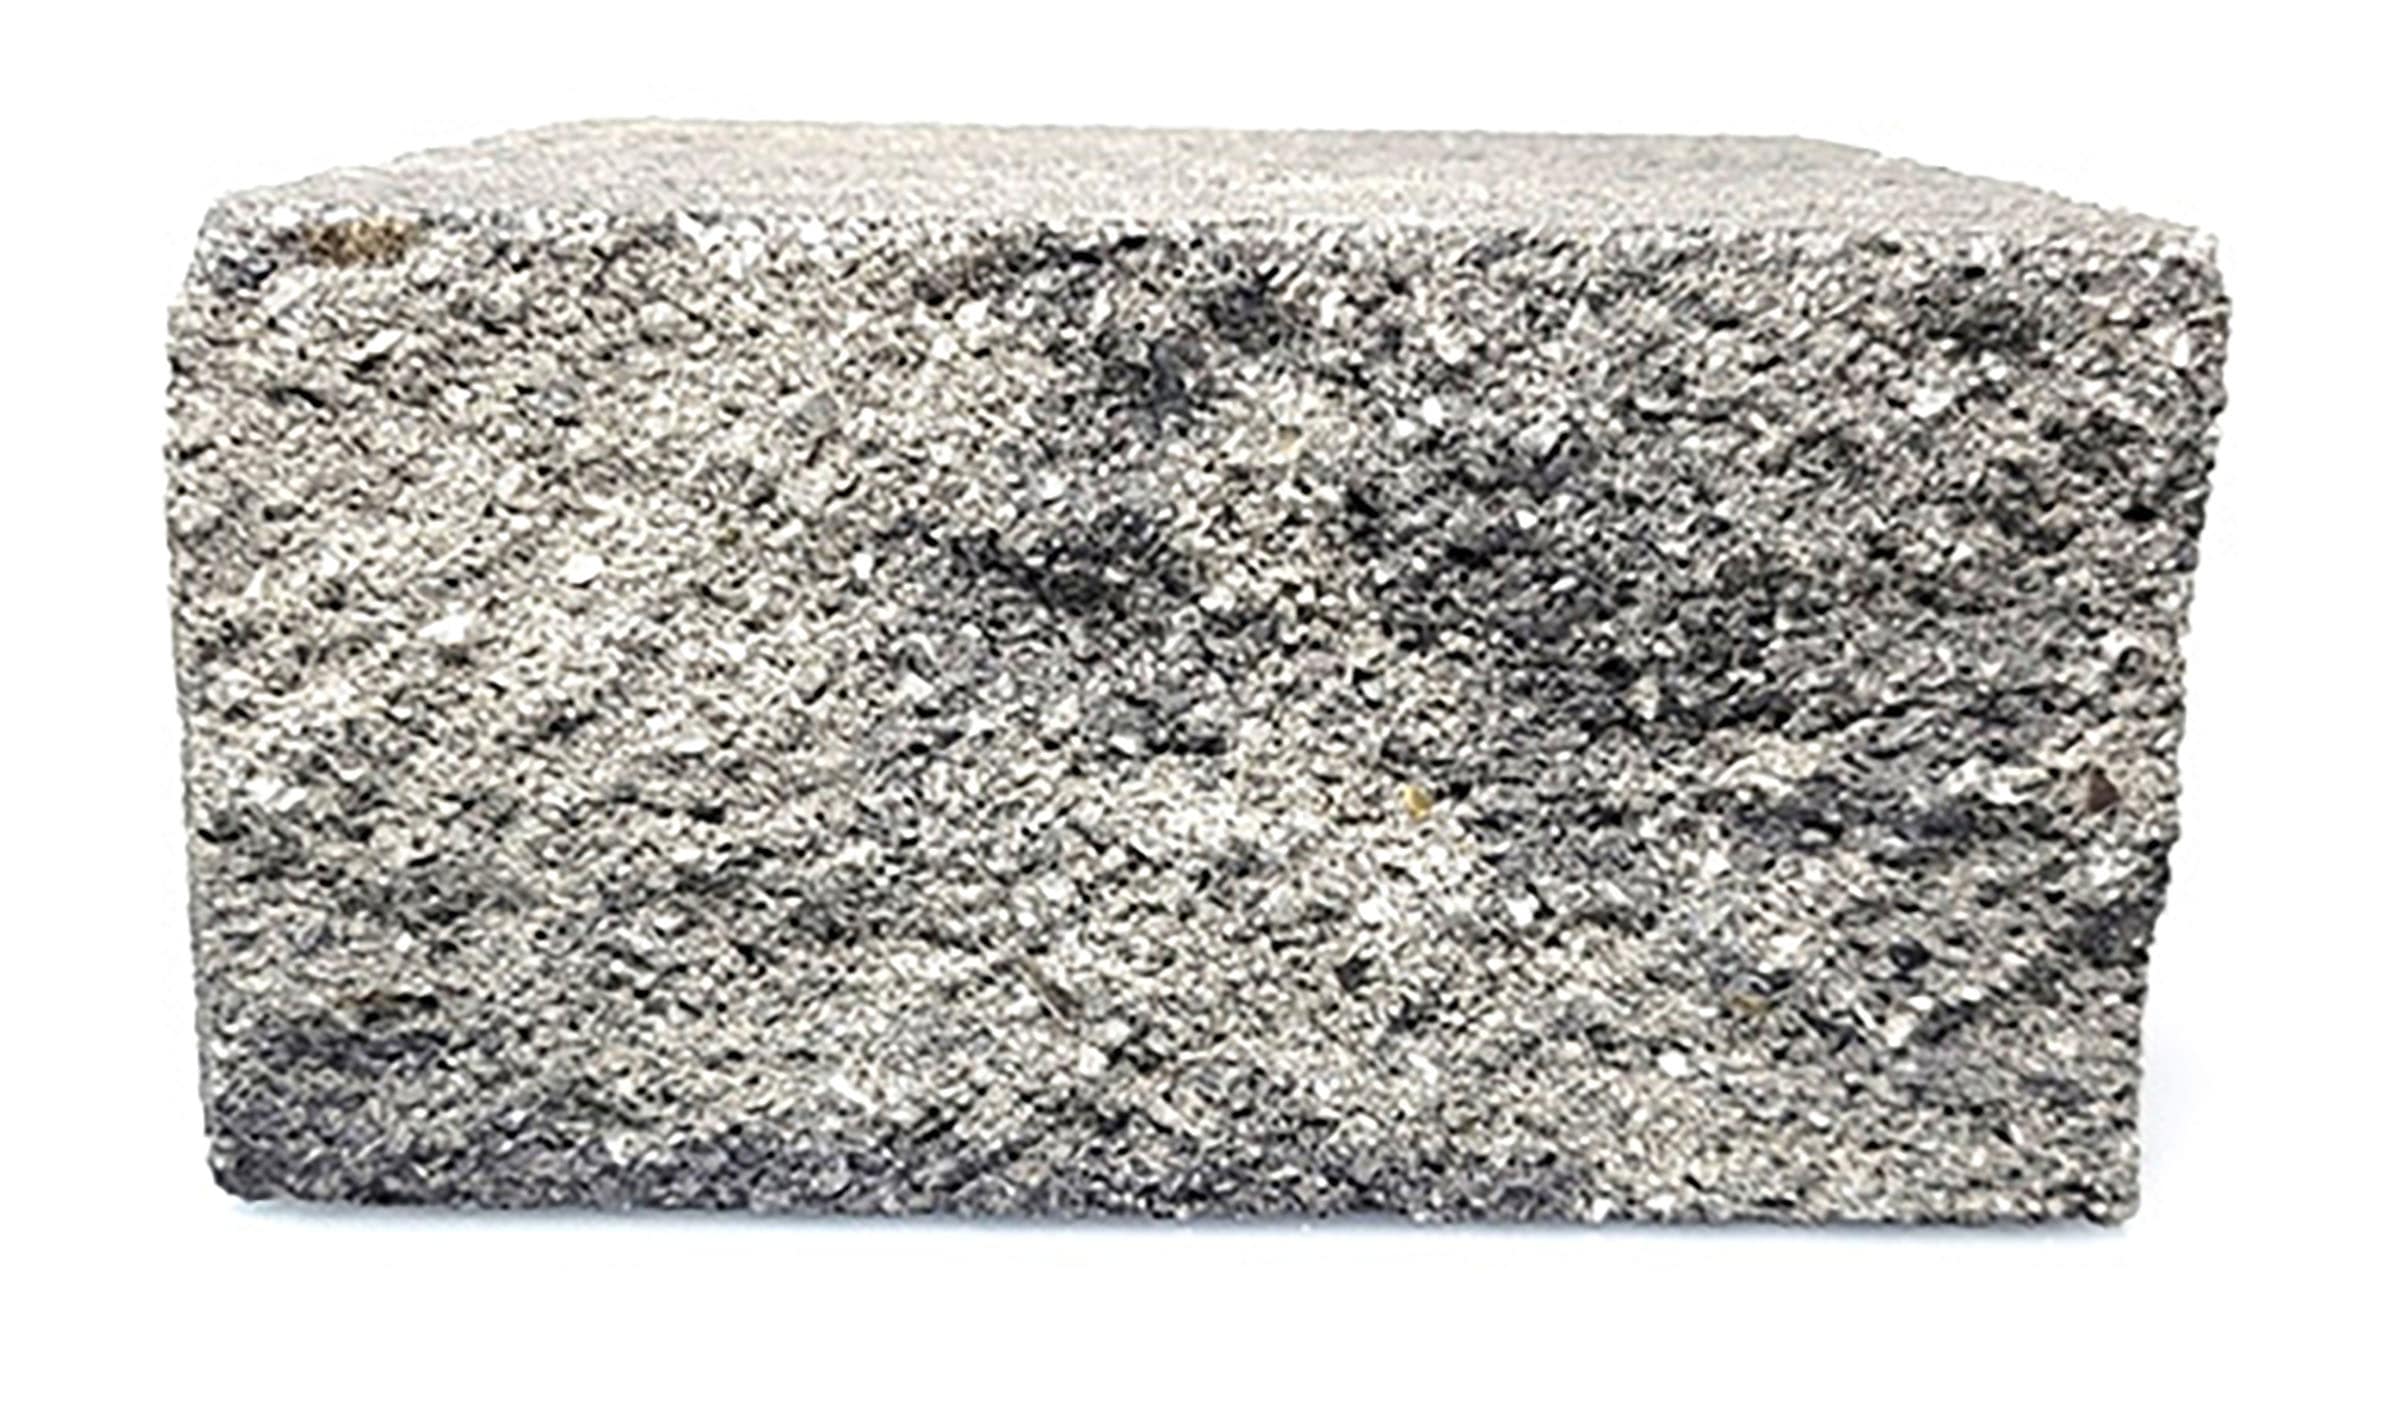 4-in H x 8-in L x 5.5-in D Gray/Charcoal Concrete Retaining Wall Block | - Lowe's KBWHGC